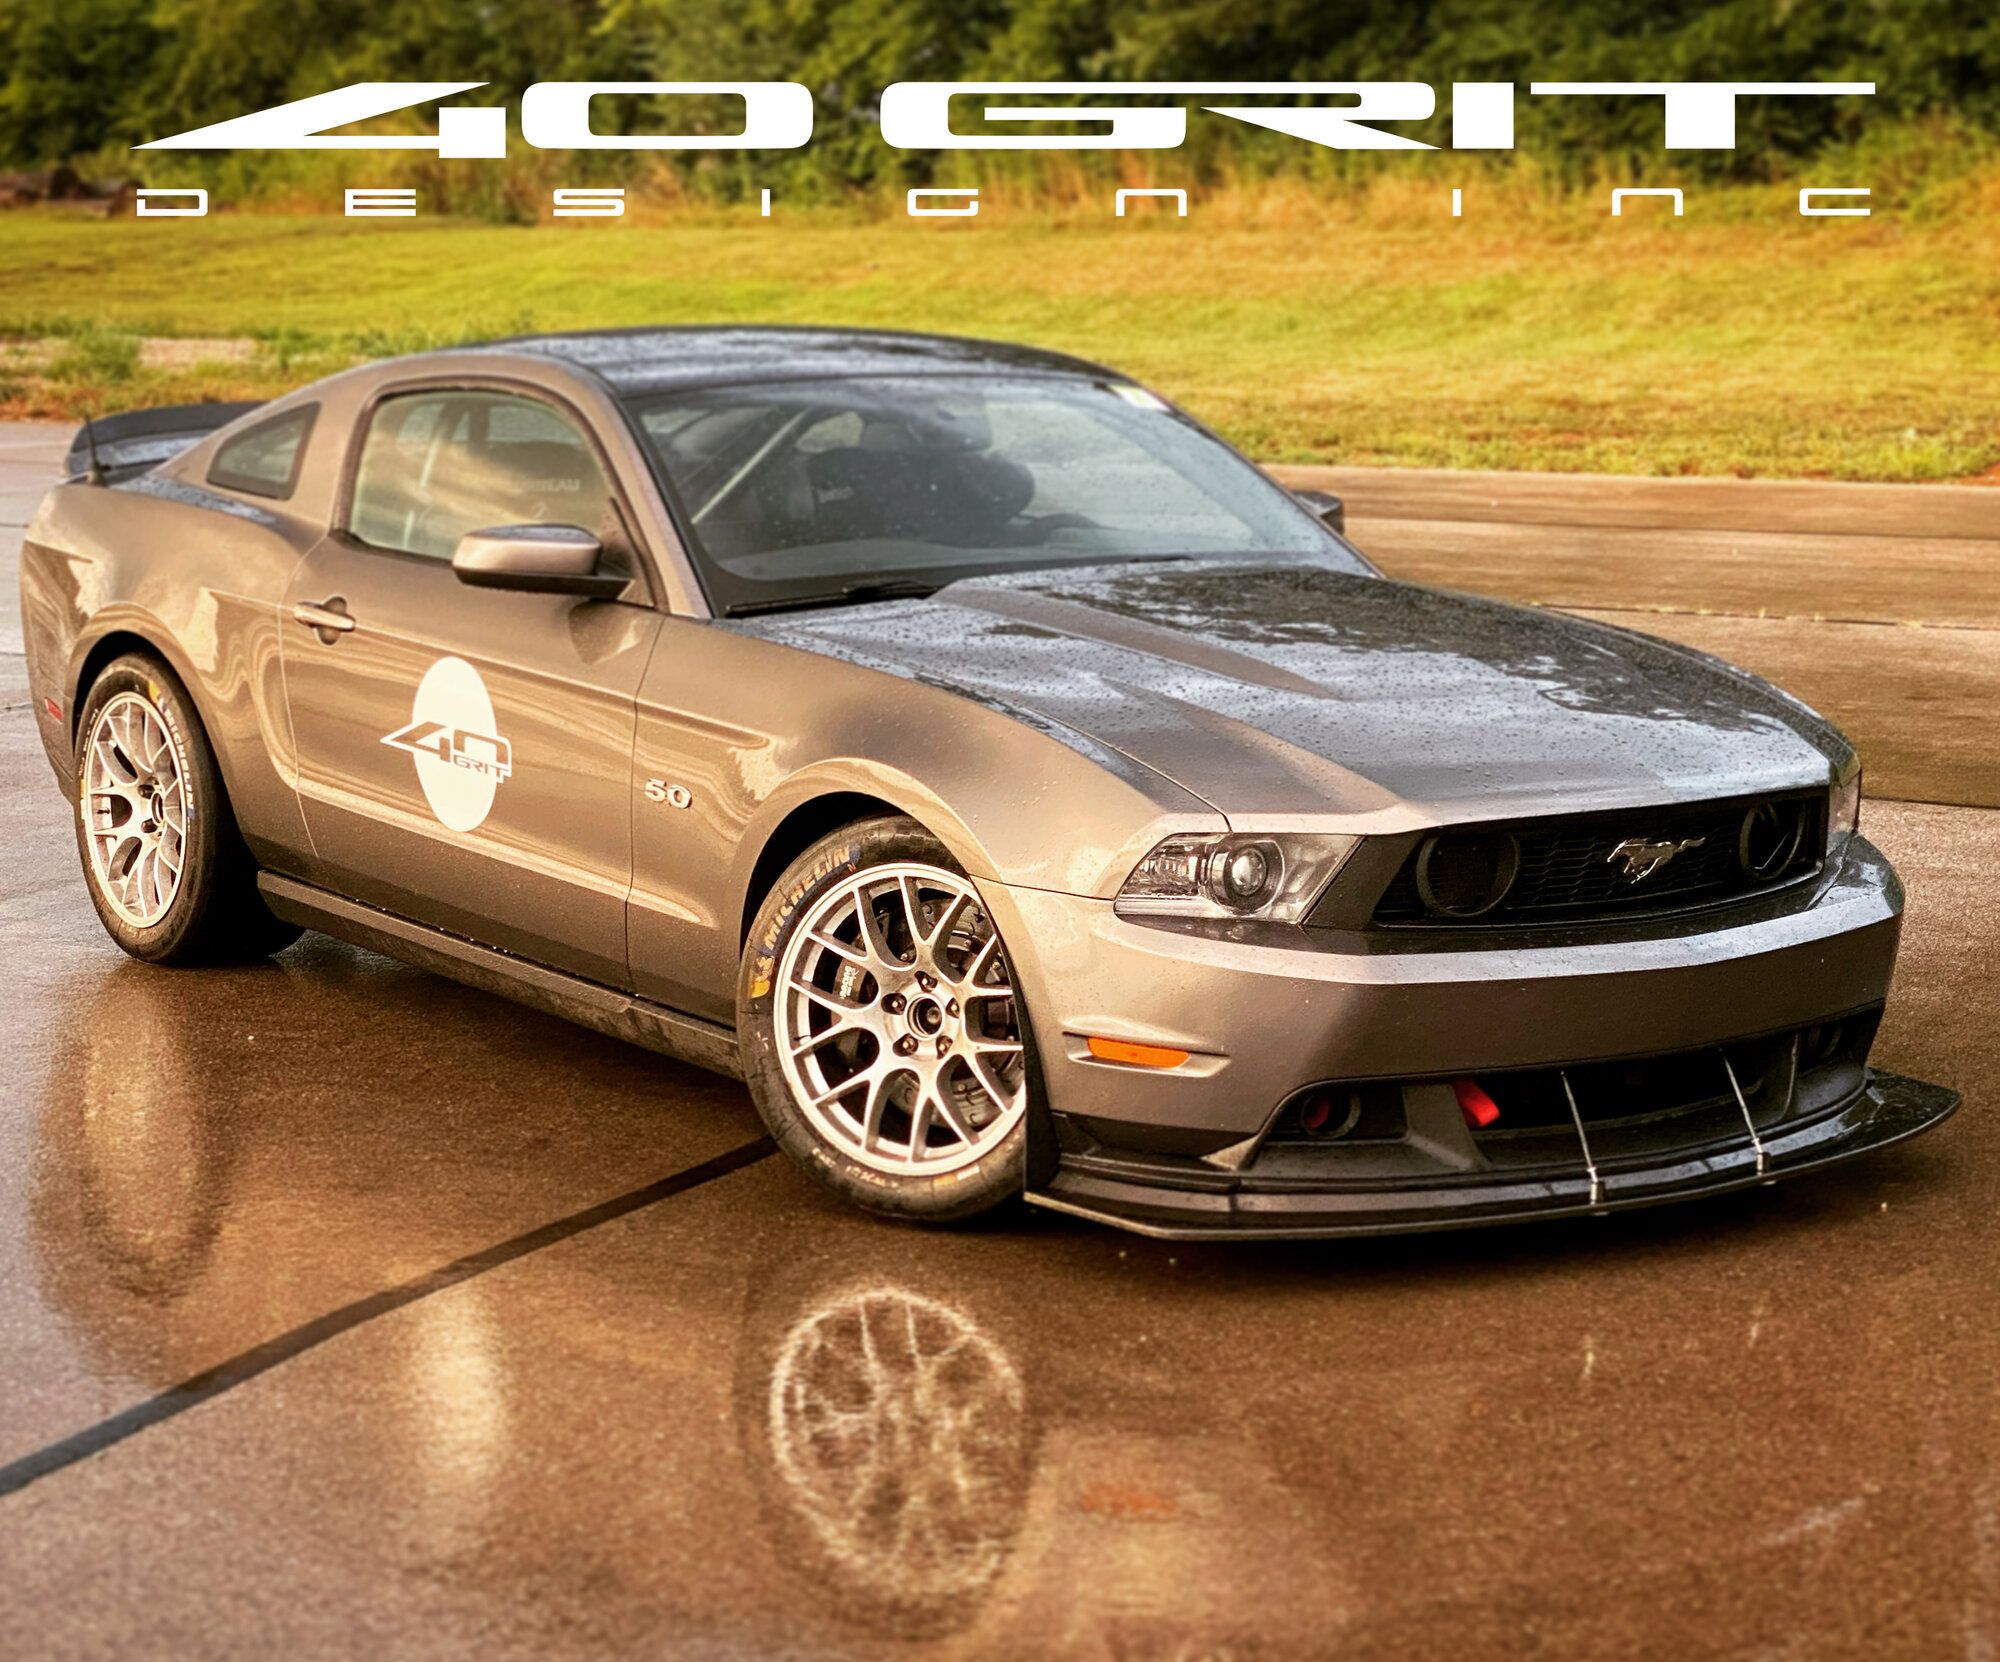 2011 Mustang
GT_50L HPDE/Track -  (40 Grit Design’s steed)